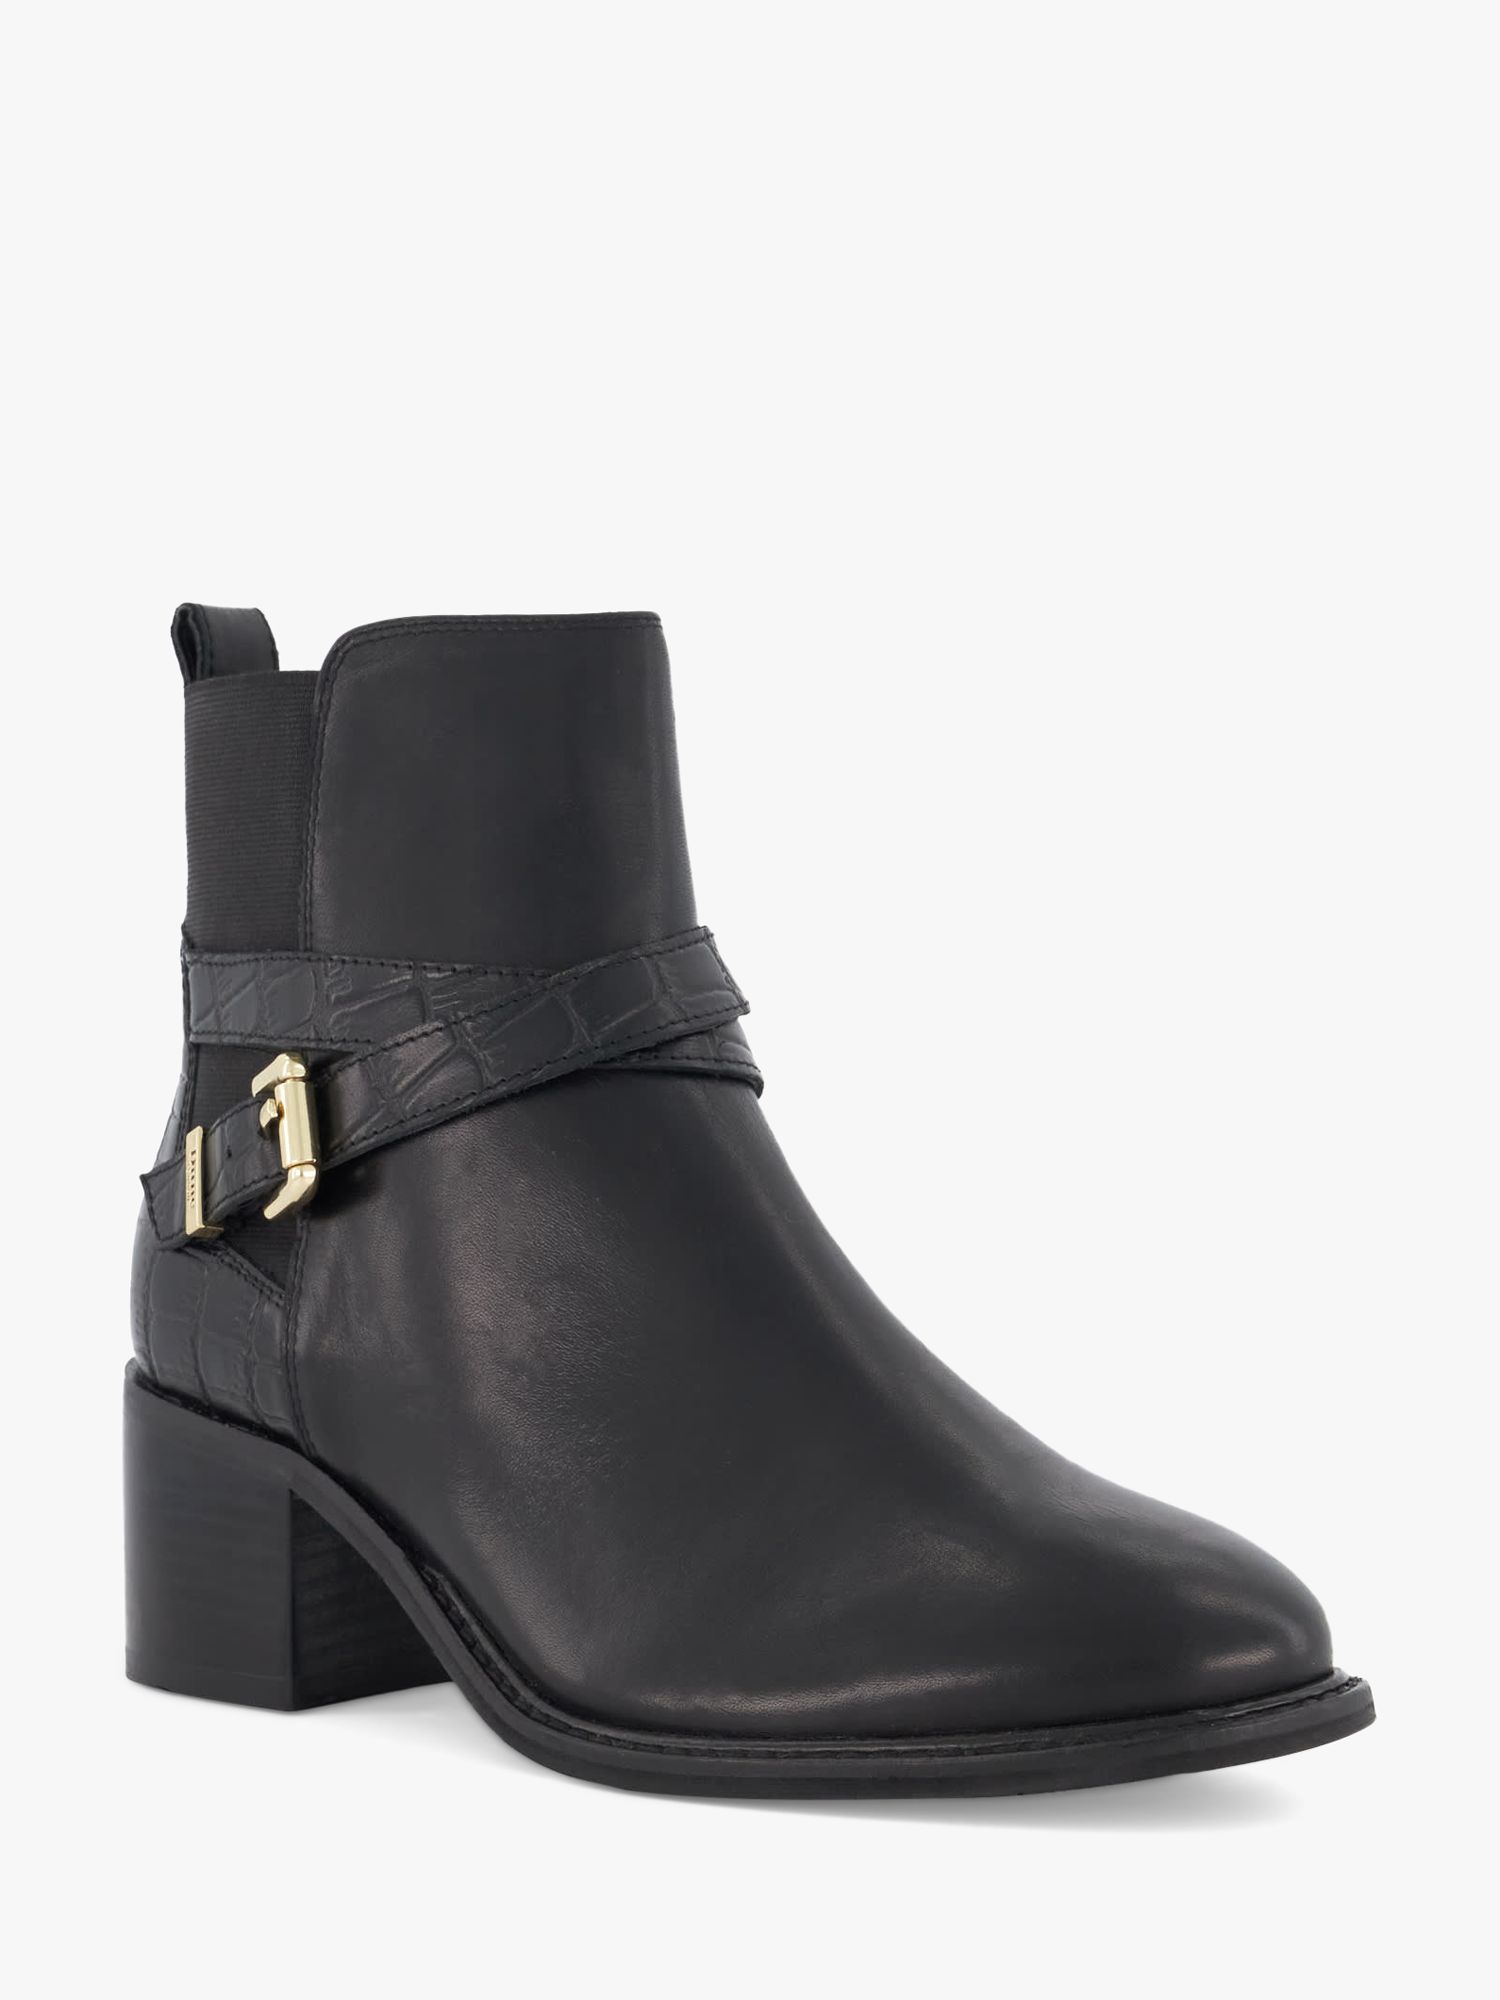 Dune Pout Leather Ankle Boots, Black at John Lewis & Partners